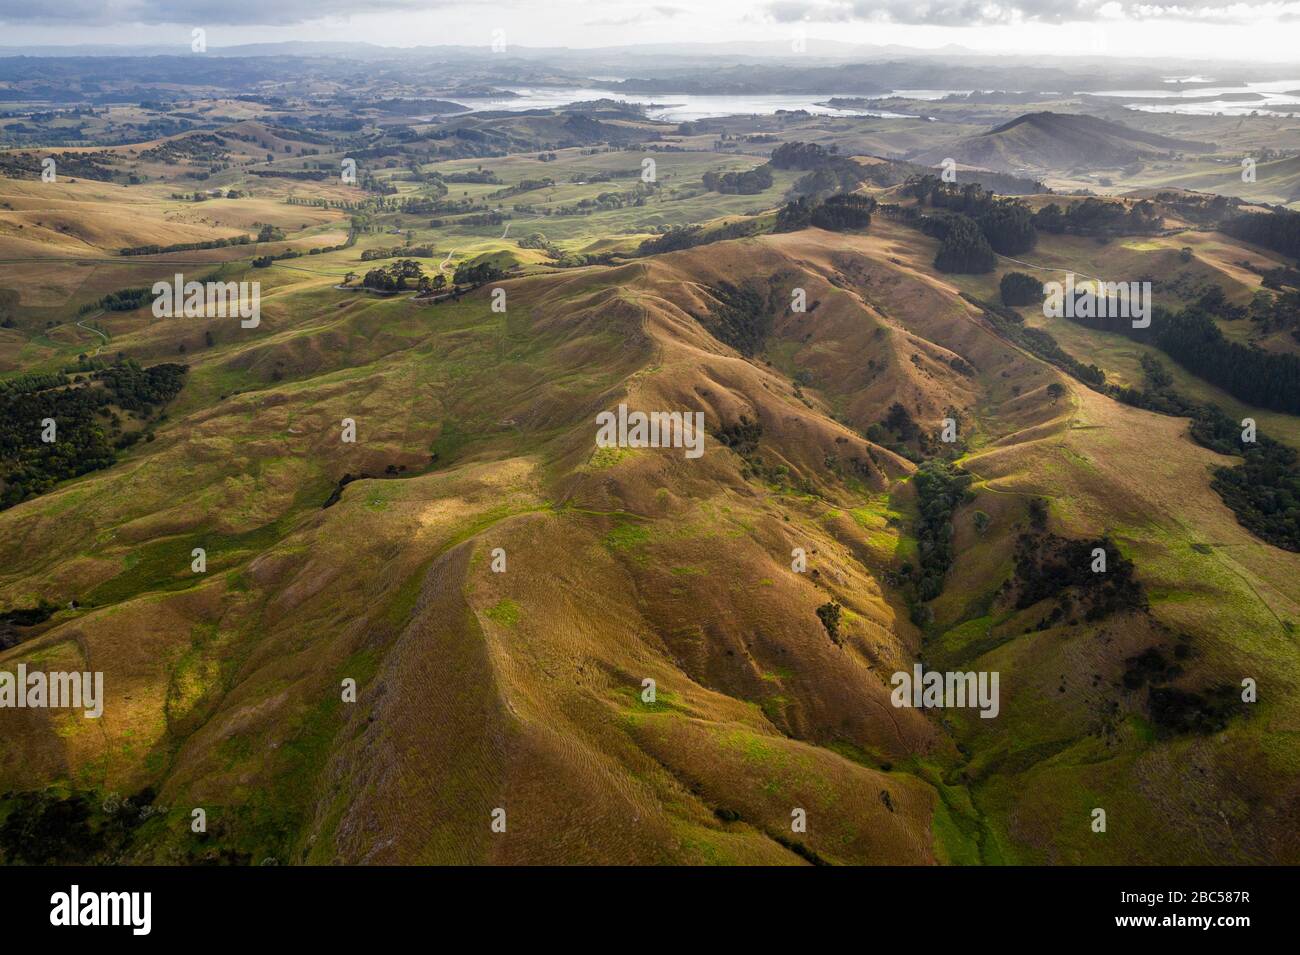 Aerial view on farmland early in the morning at Ruawai area in Northland, New Zealand. The landscape shows an extension of land full of hills till the Stock Photo